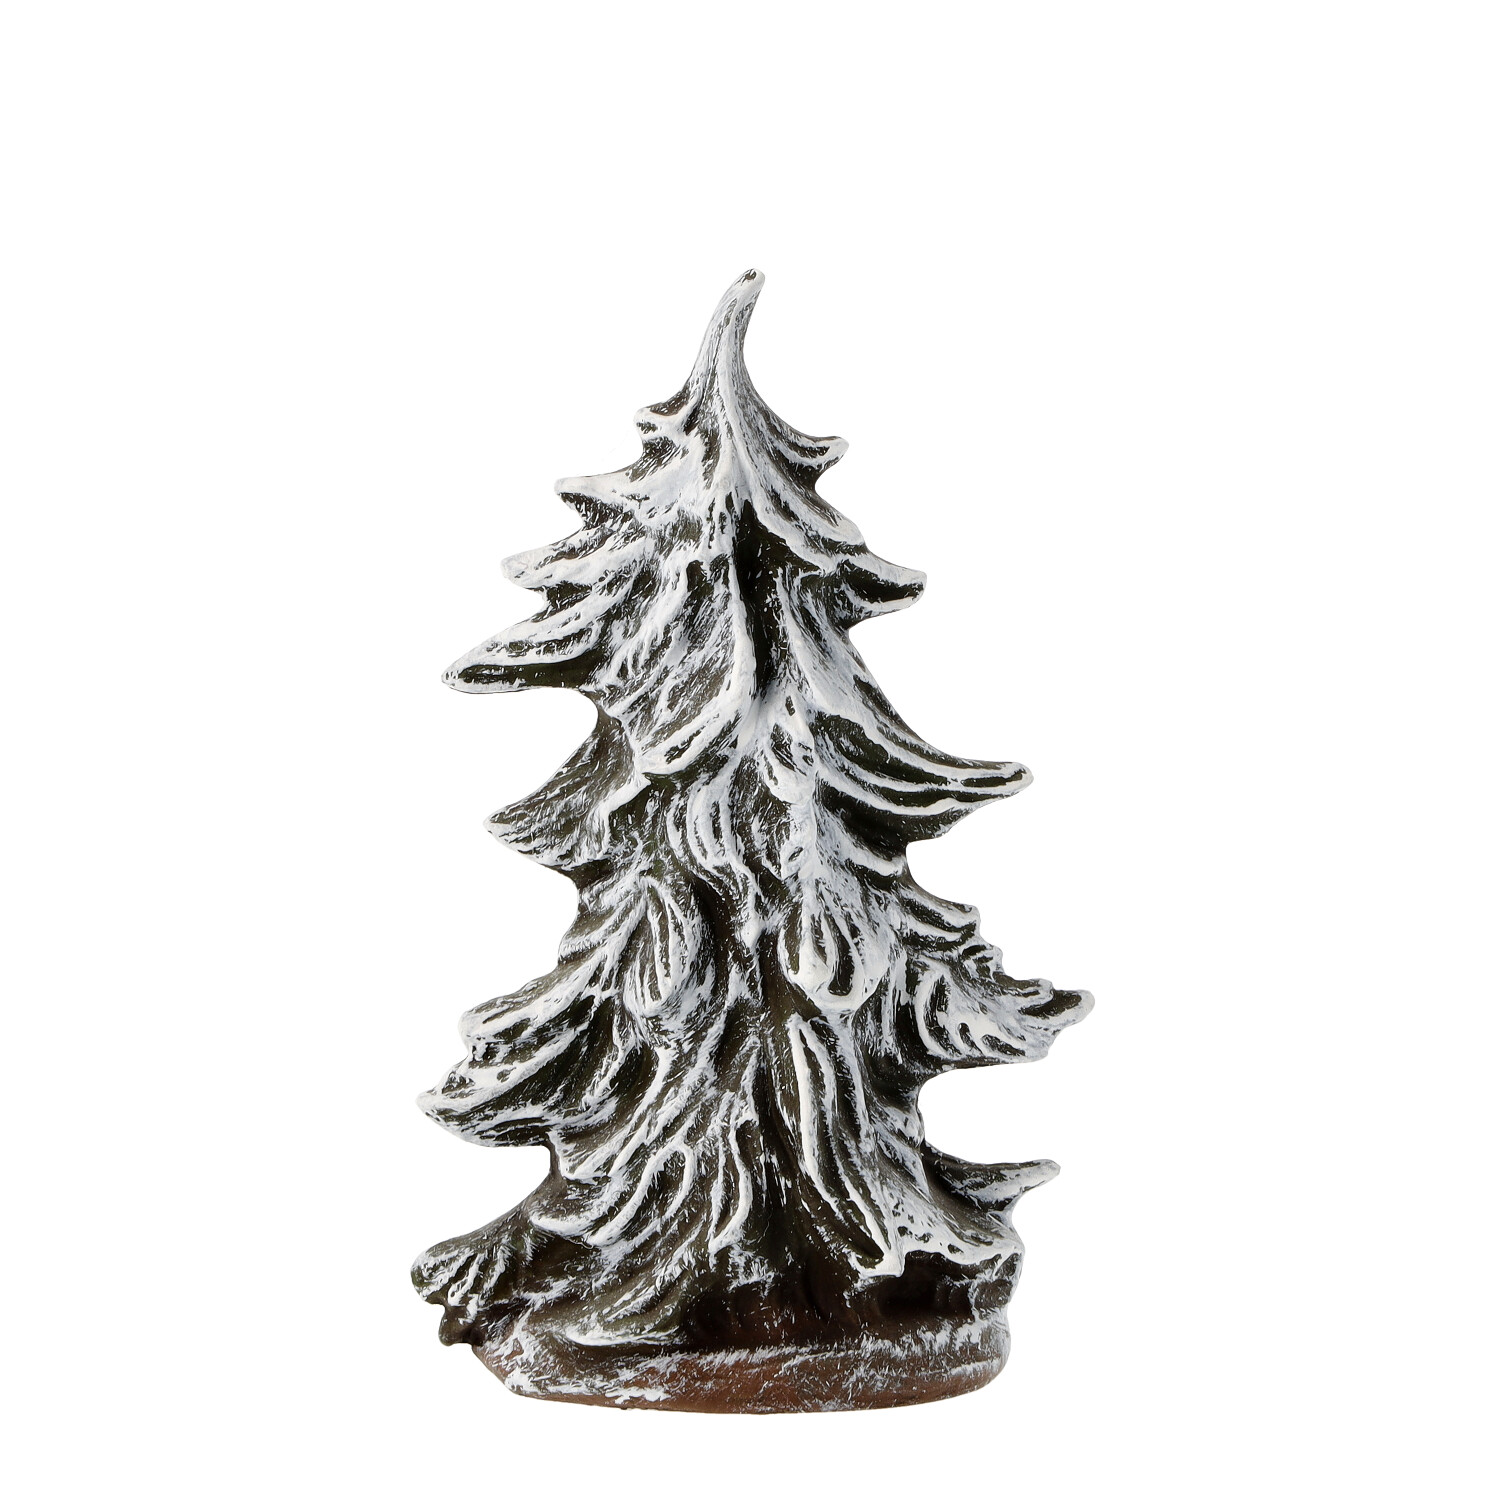 Wide fir bush with snow - Marolin papermaché - made in Germany